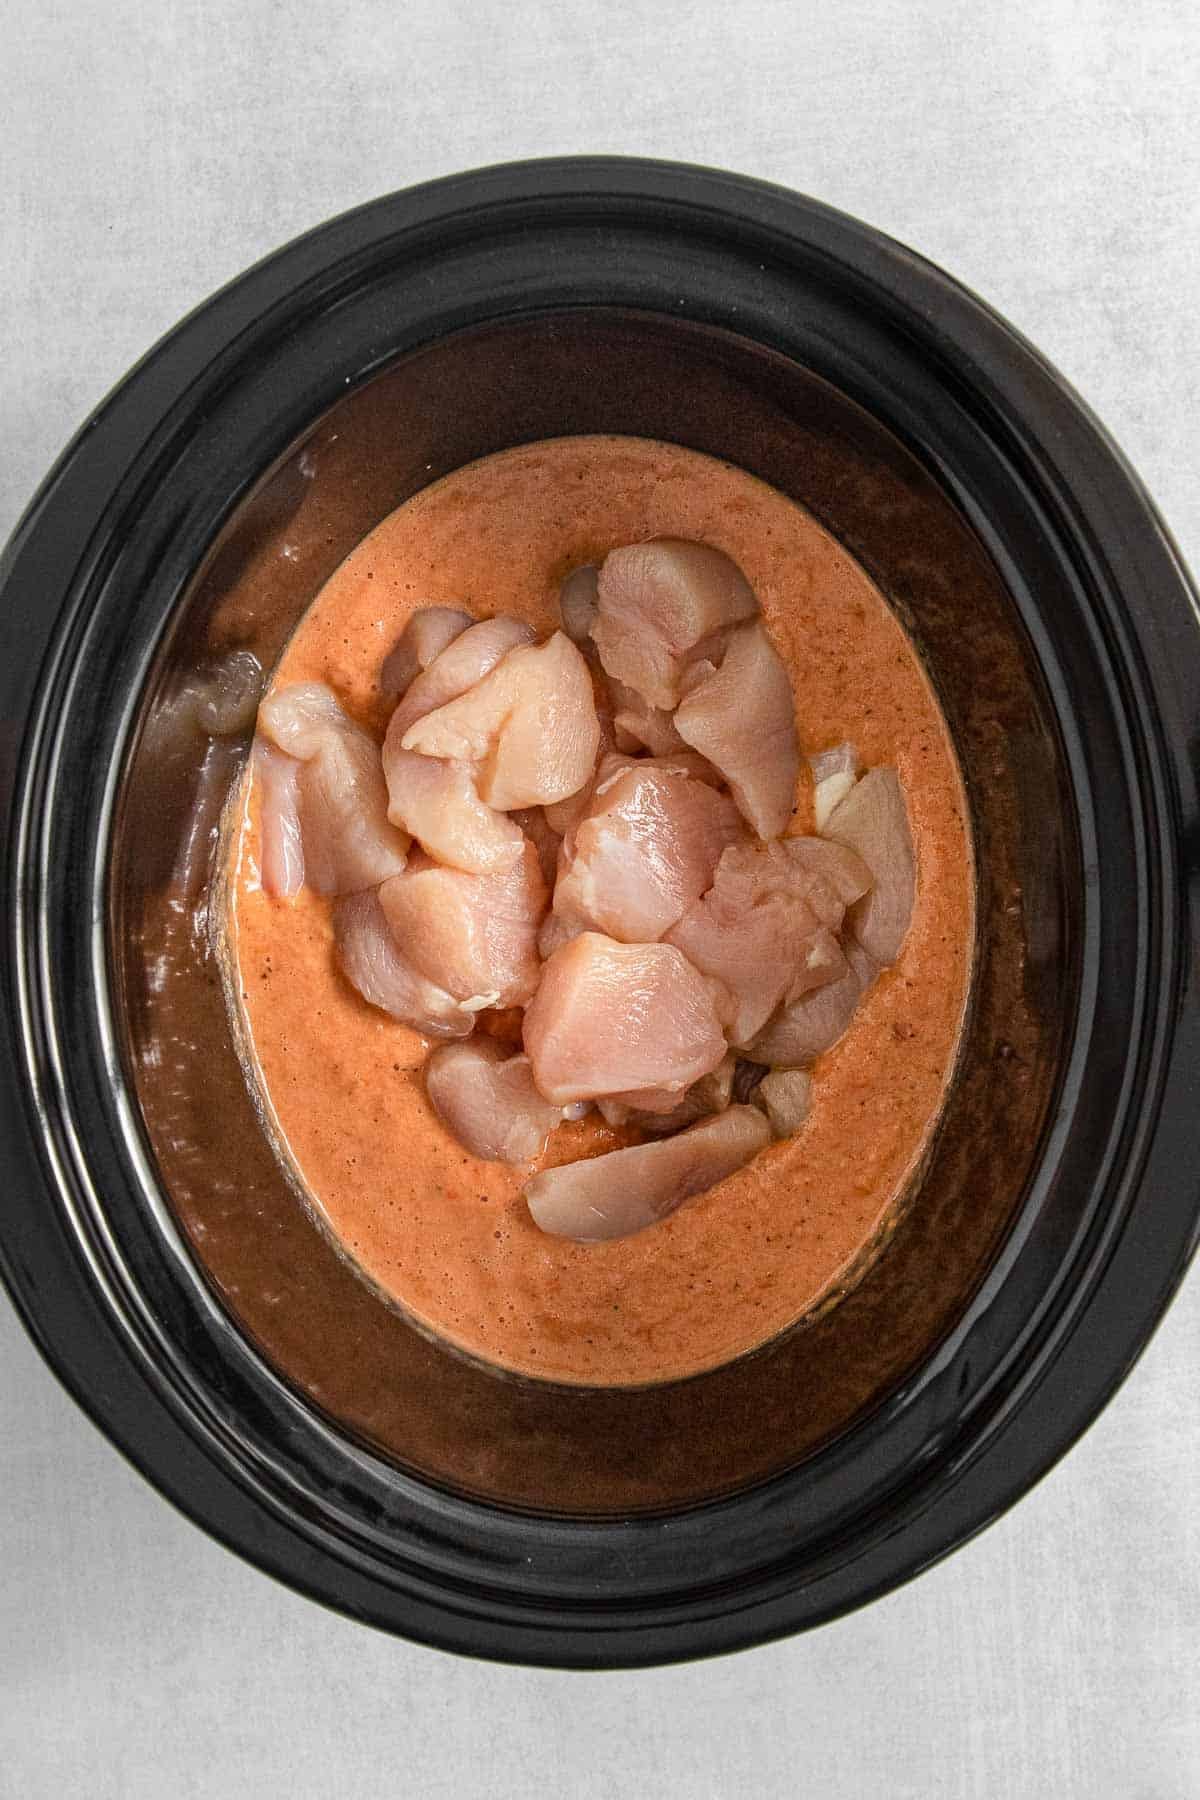 A black crock pot filled with raw chicken in a red cream sauce.